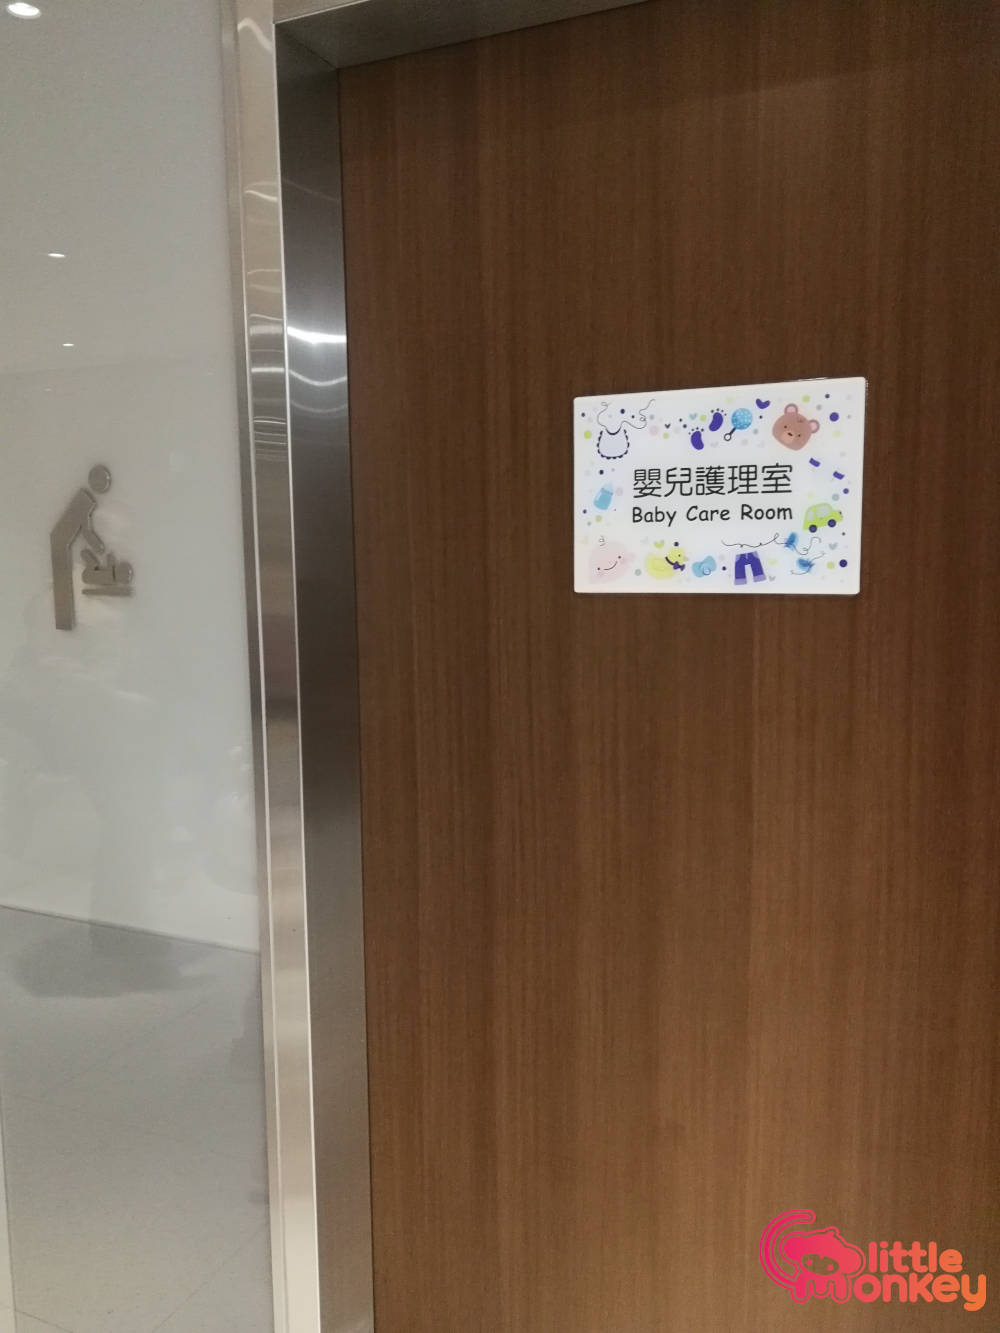 Amoy Plaza's entrance door of baby care room